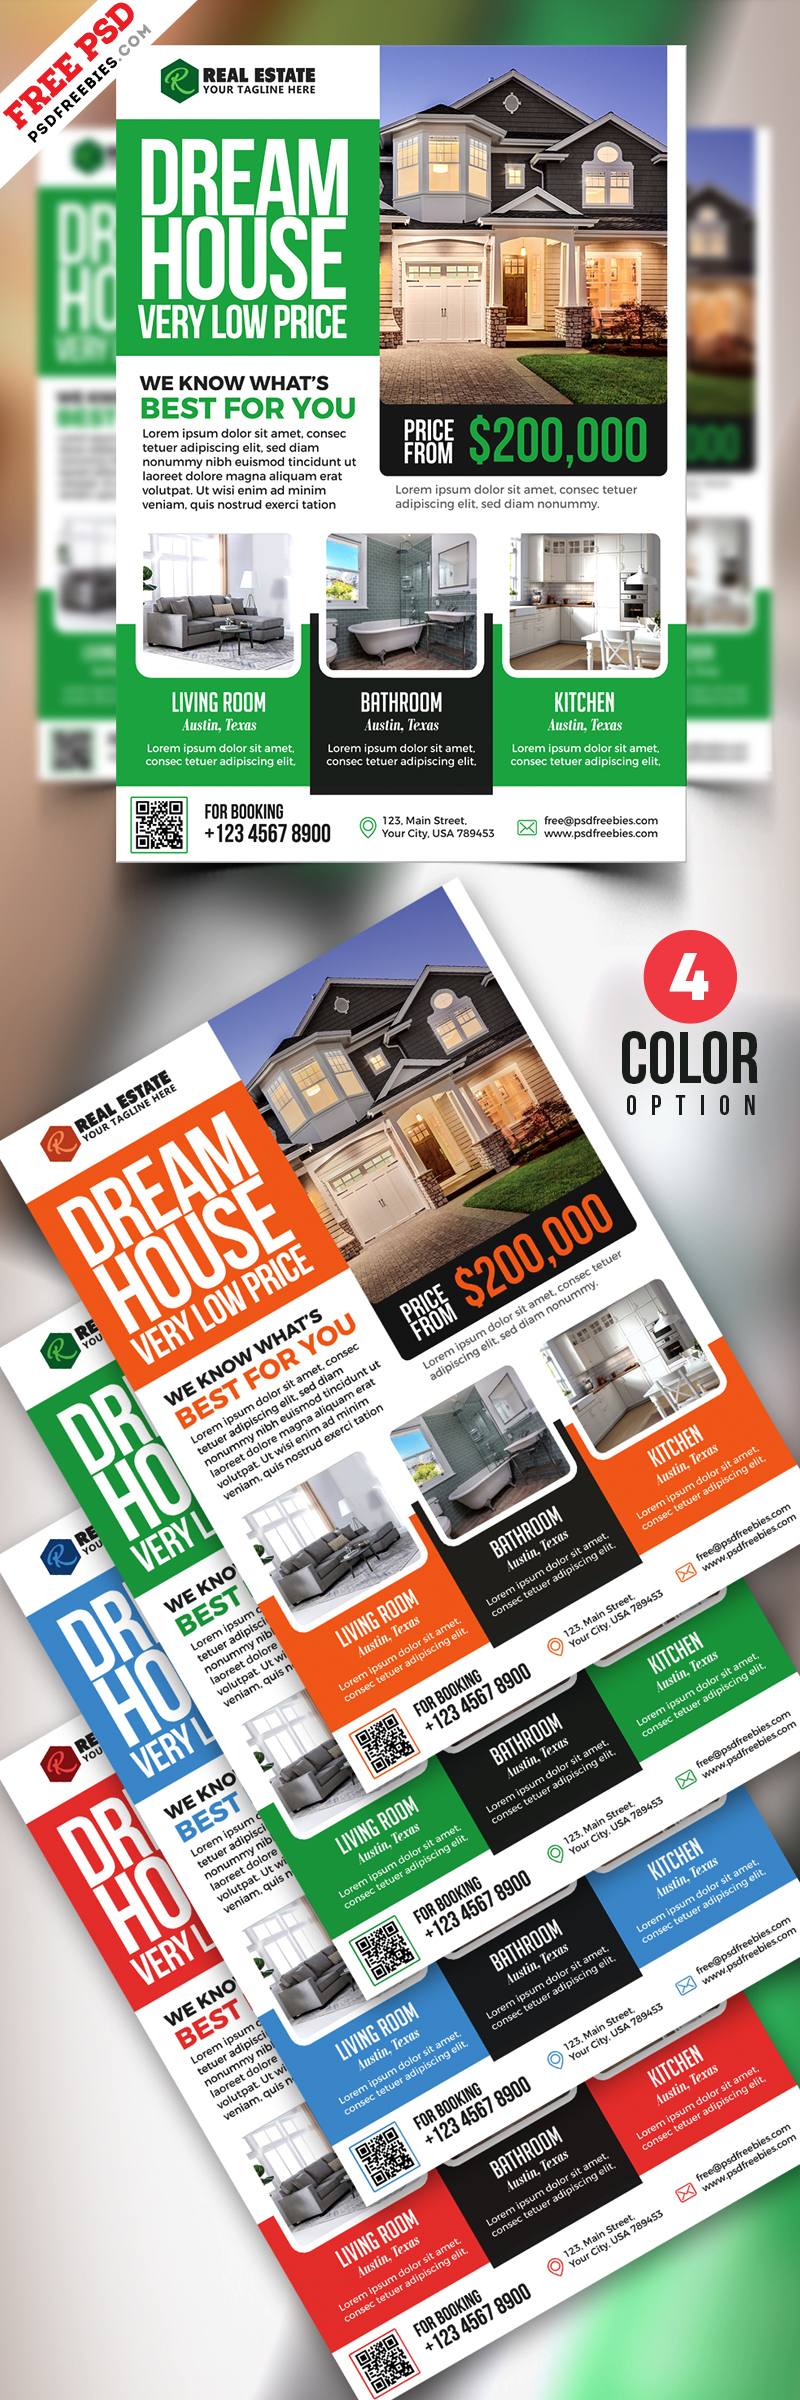 PSD Real Estate Flyer Templates – PSDFreebies.com Throughout Real Estate Brochure Templates Psd Free Download